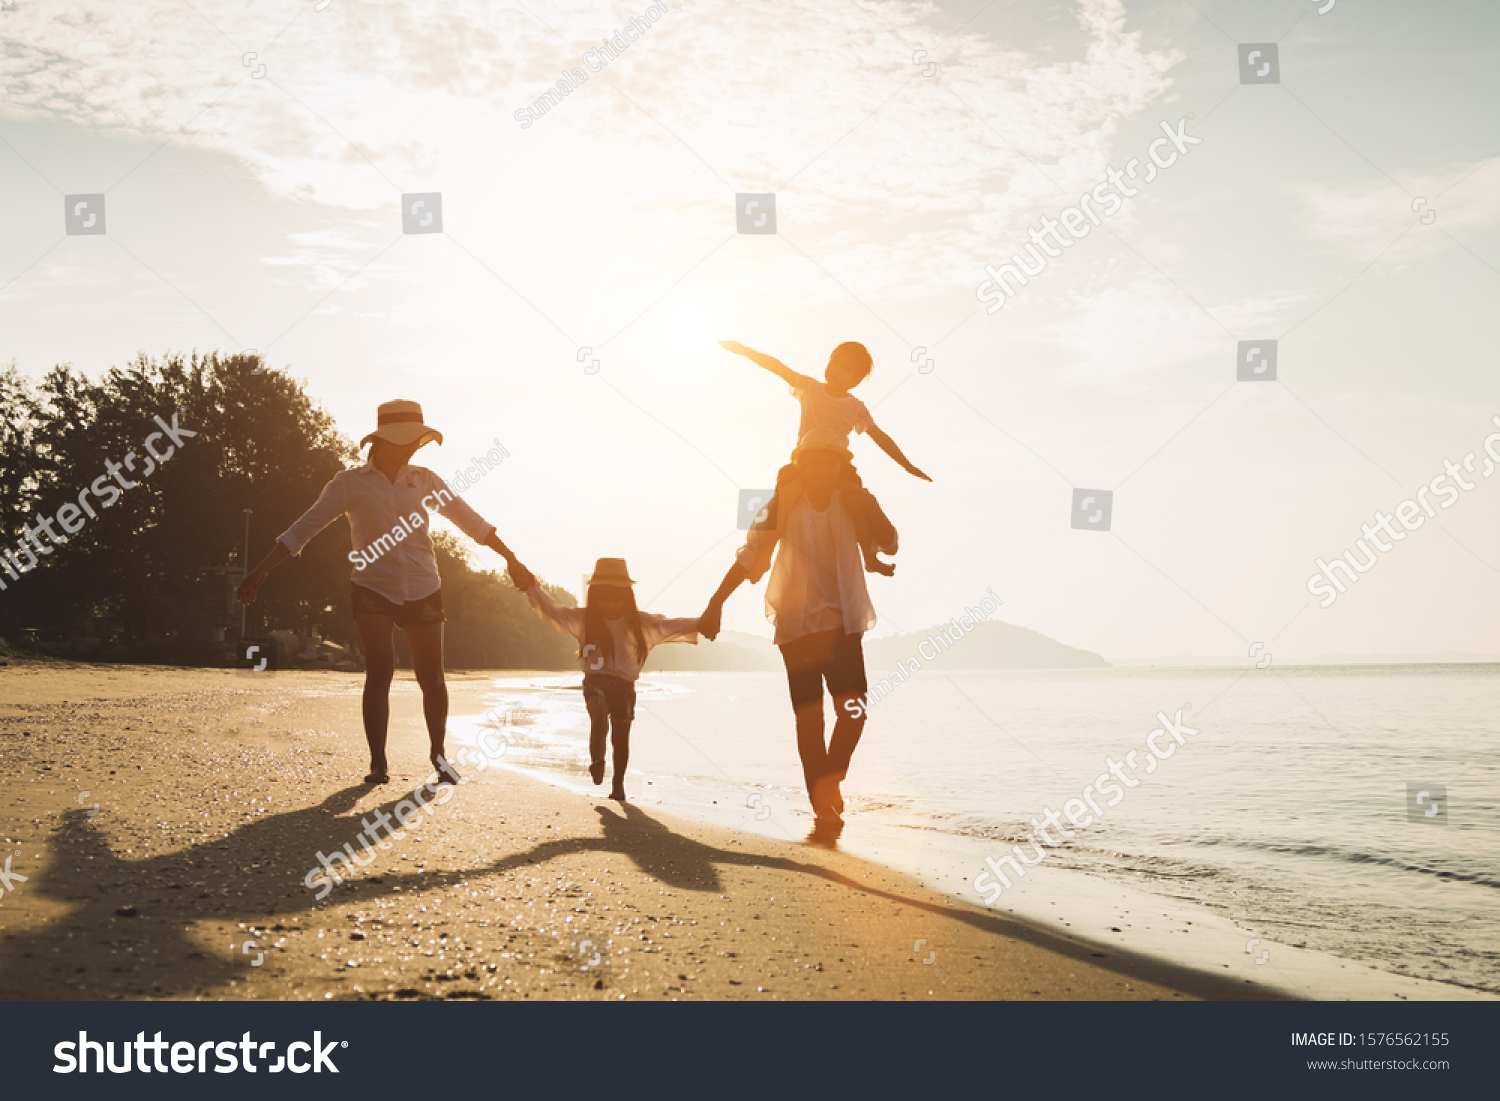 Happy family travel on beach in holiday,Summer vacations. Happy family are having fun on a tropical beach in sunset. Father and mother and children playing together outdoor on beach. #1576562155